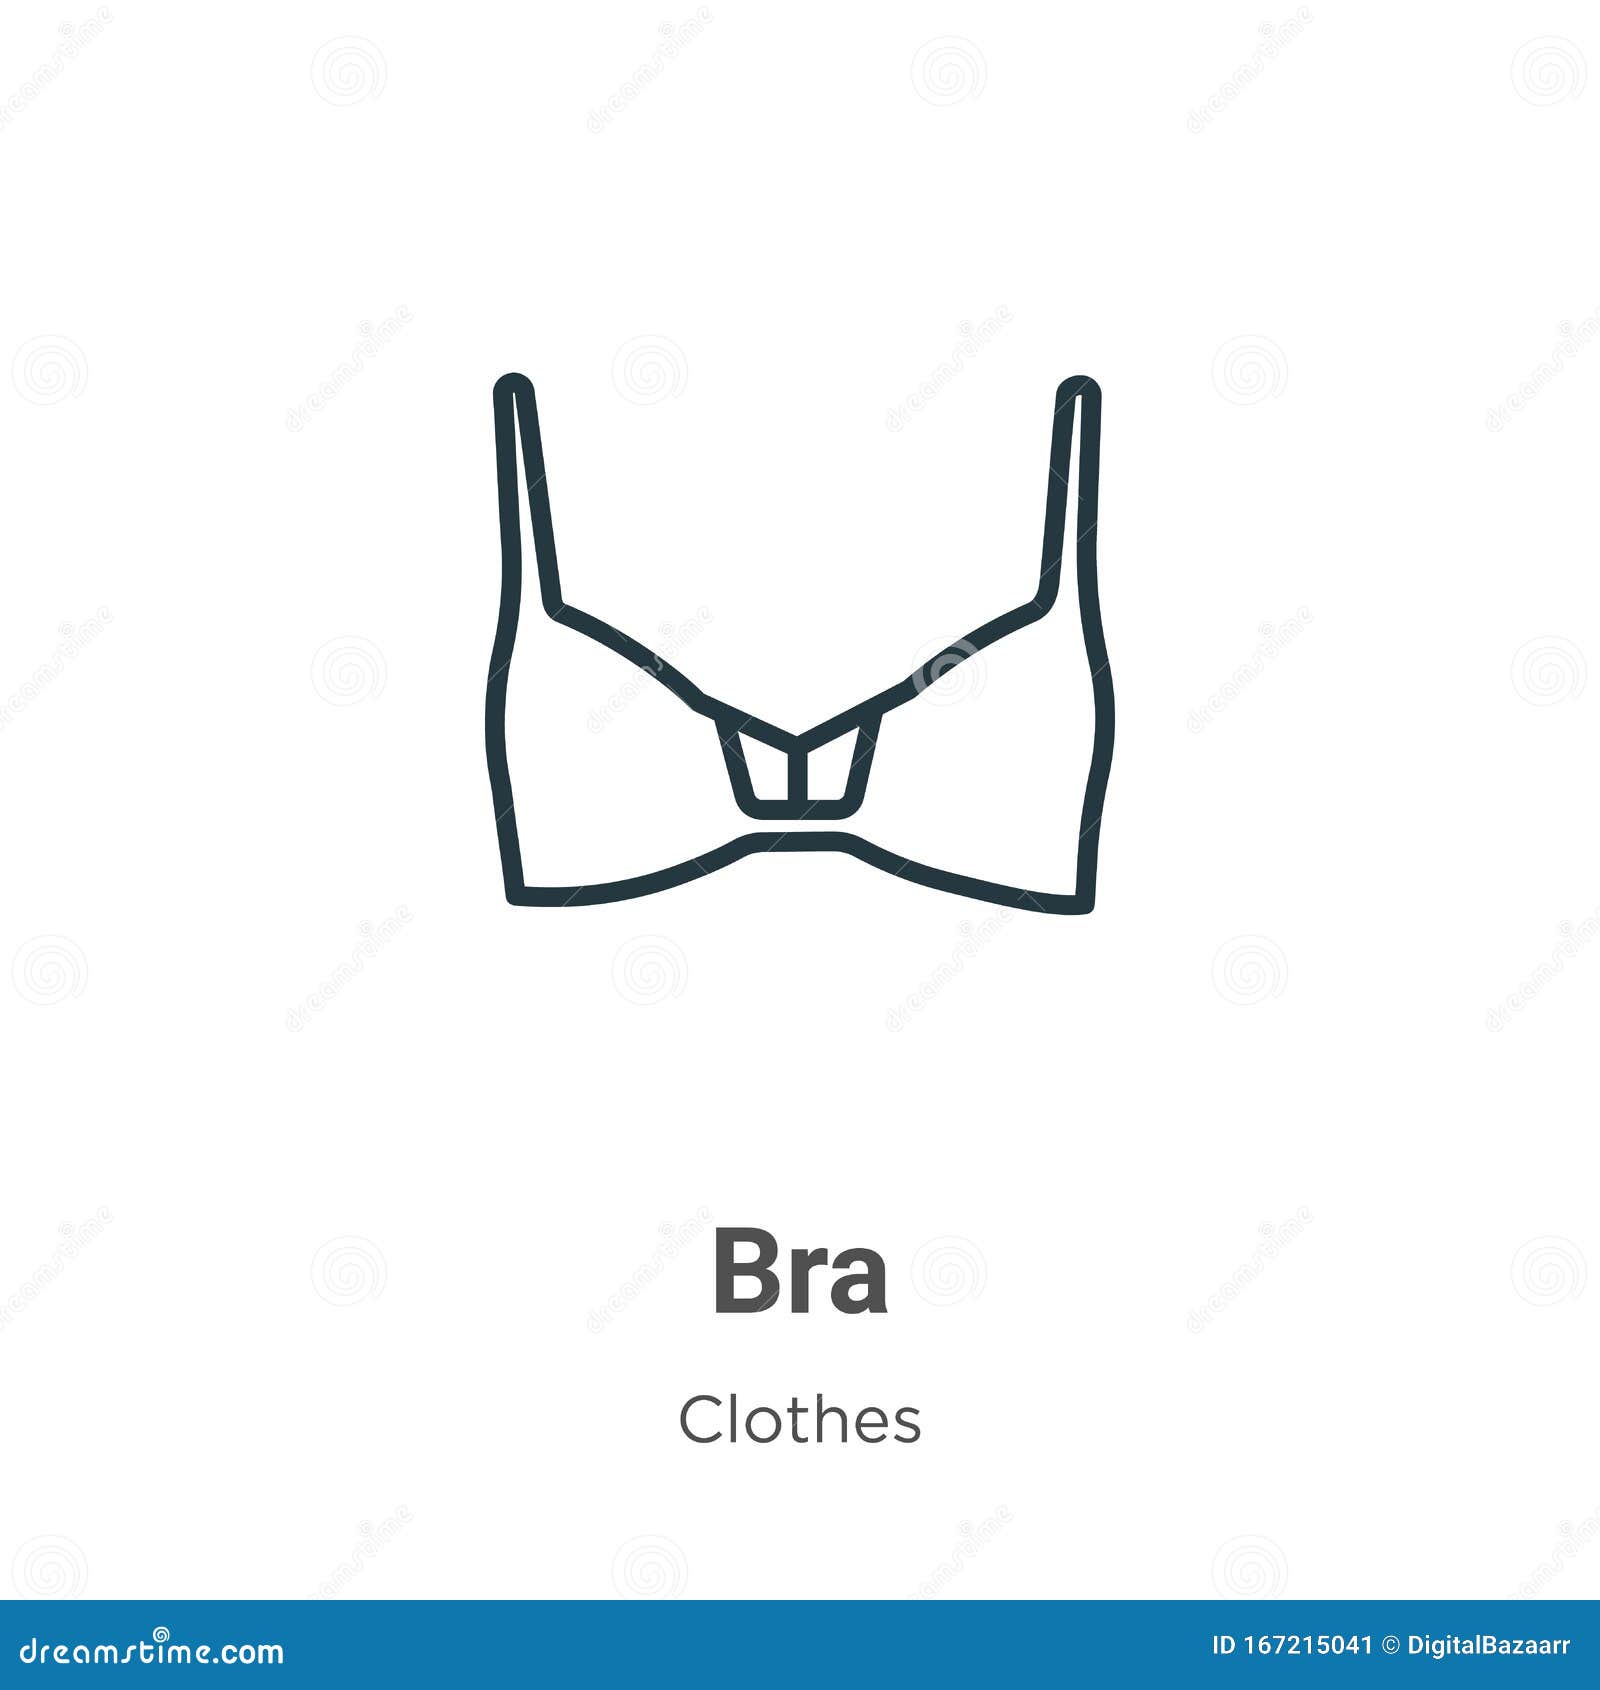 https://thumbs.dreamstime.com/z/bra-outline-vector-icon-thin-line-black-bra-icon-flat-vector-simple-element-illustration-editable-clothes-concept-isolated-167215041.jpg